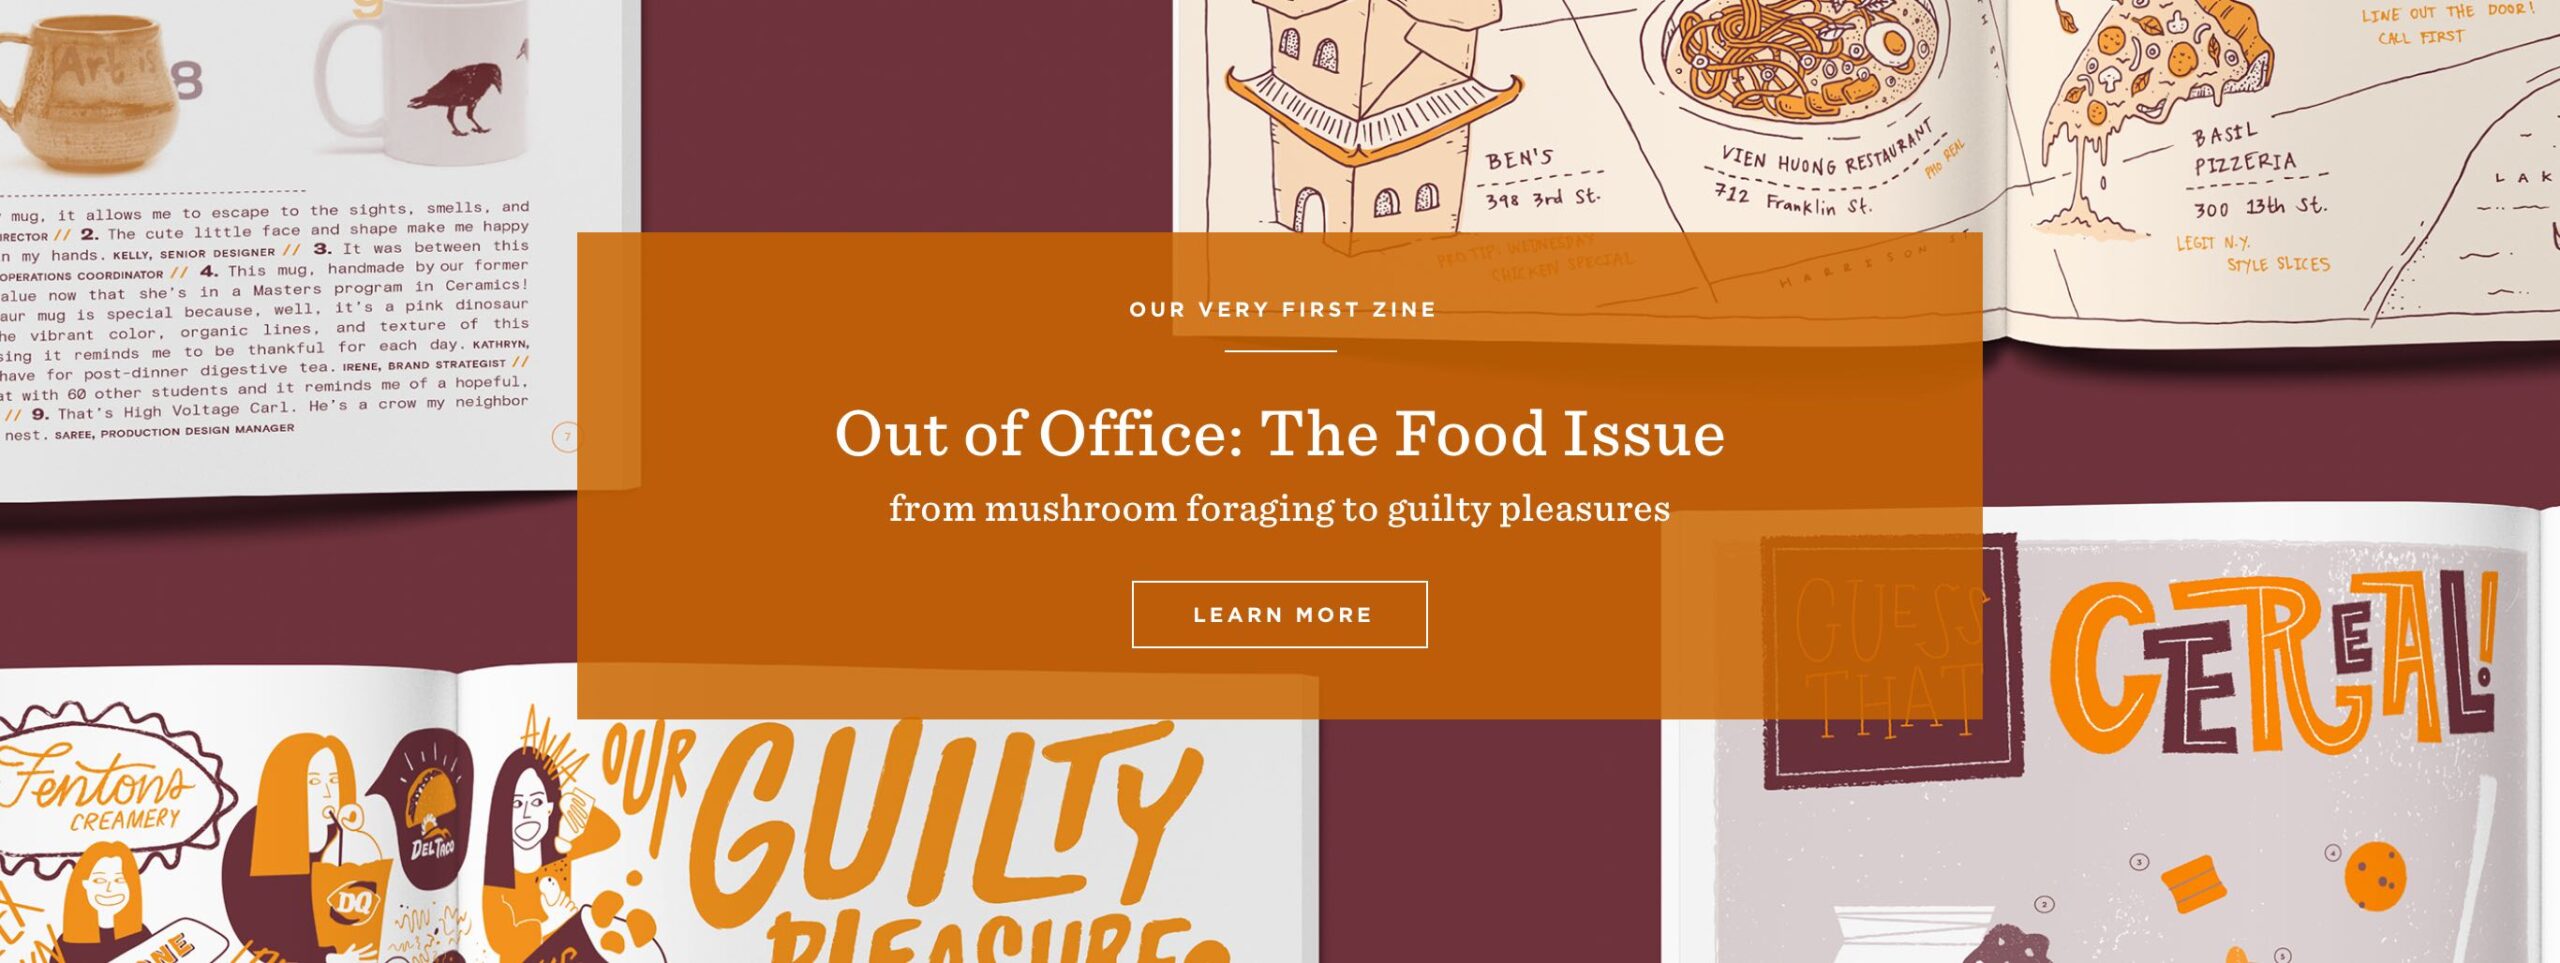 Our very first zine: Out of Office, The Food Issue: from mushroom foraging to guilty pleasures. Learn more